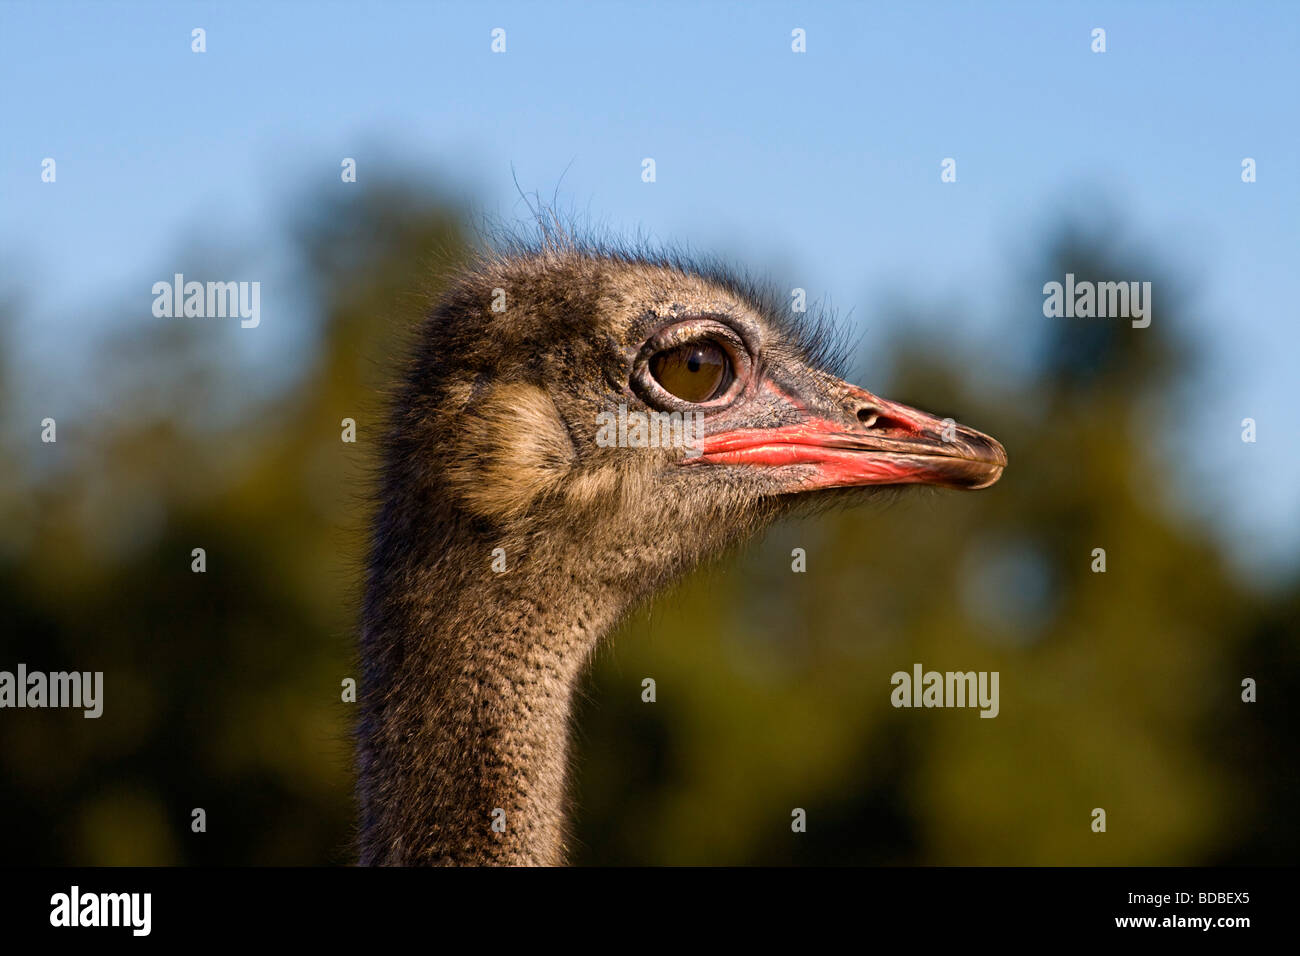 An Ostrich, Struthio camelus, is a large flightless bird native to Africa. Stock Photo